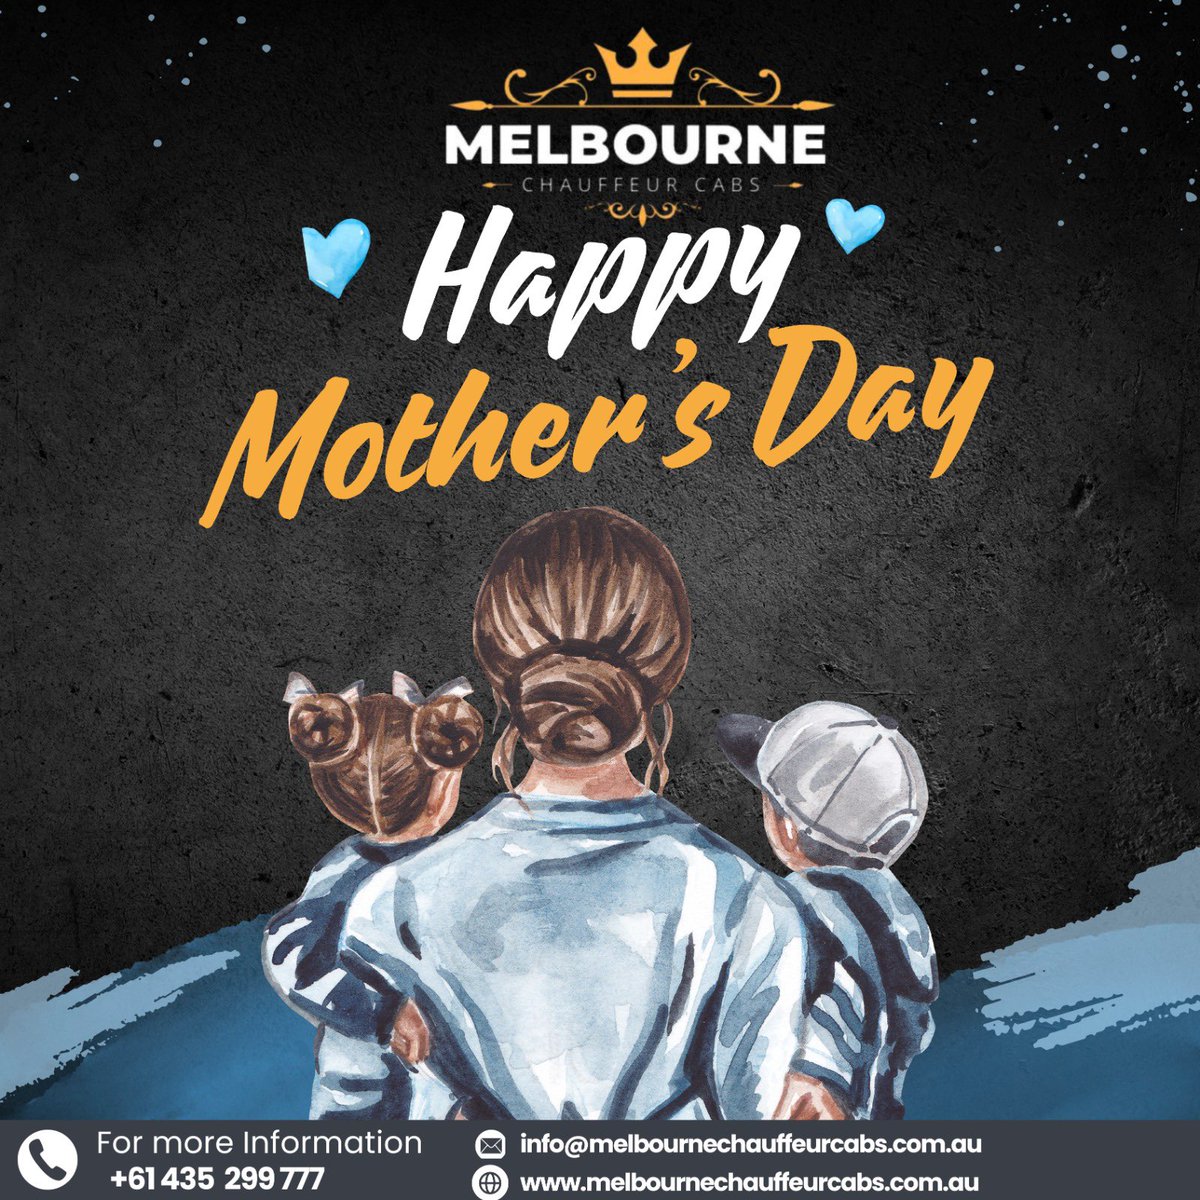 🌷 Happy Mother's Day to all the amazing mothers who deserve to be celebrated every day! 🌷 Sit back, relax, and let Melbourne Chauffeur Cabs take care of all your transportation needs today. Whether it's a special outing with family or a well-deserved pampering day, we're here